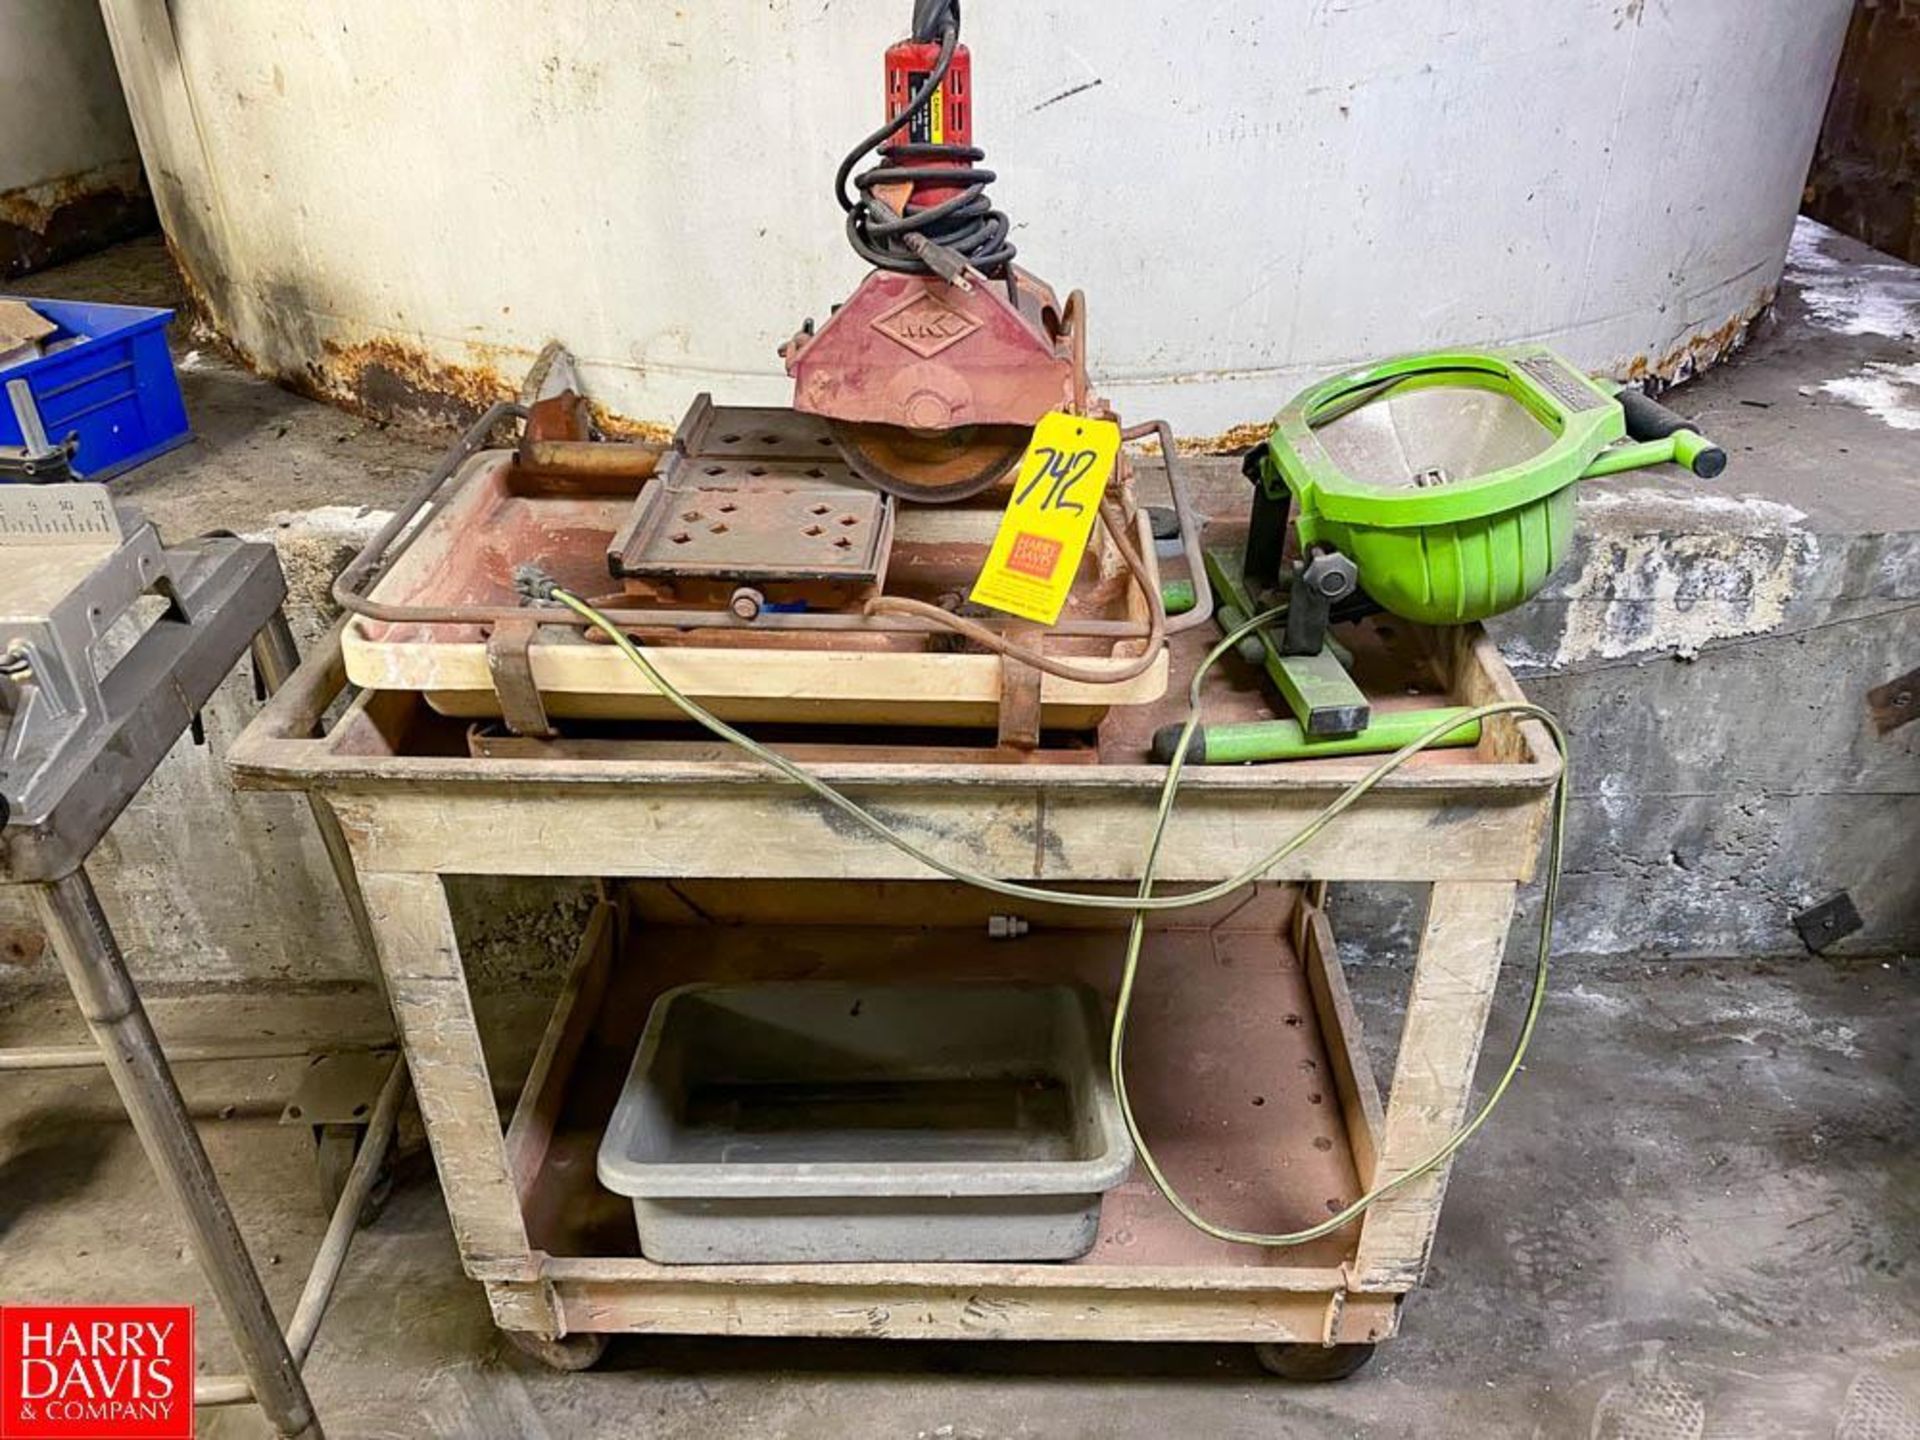 MK Tile Saw with Work Light and Cart - Rigging Fee: $50